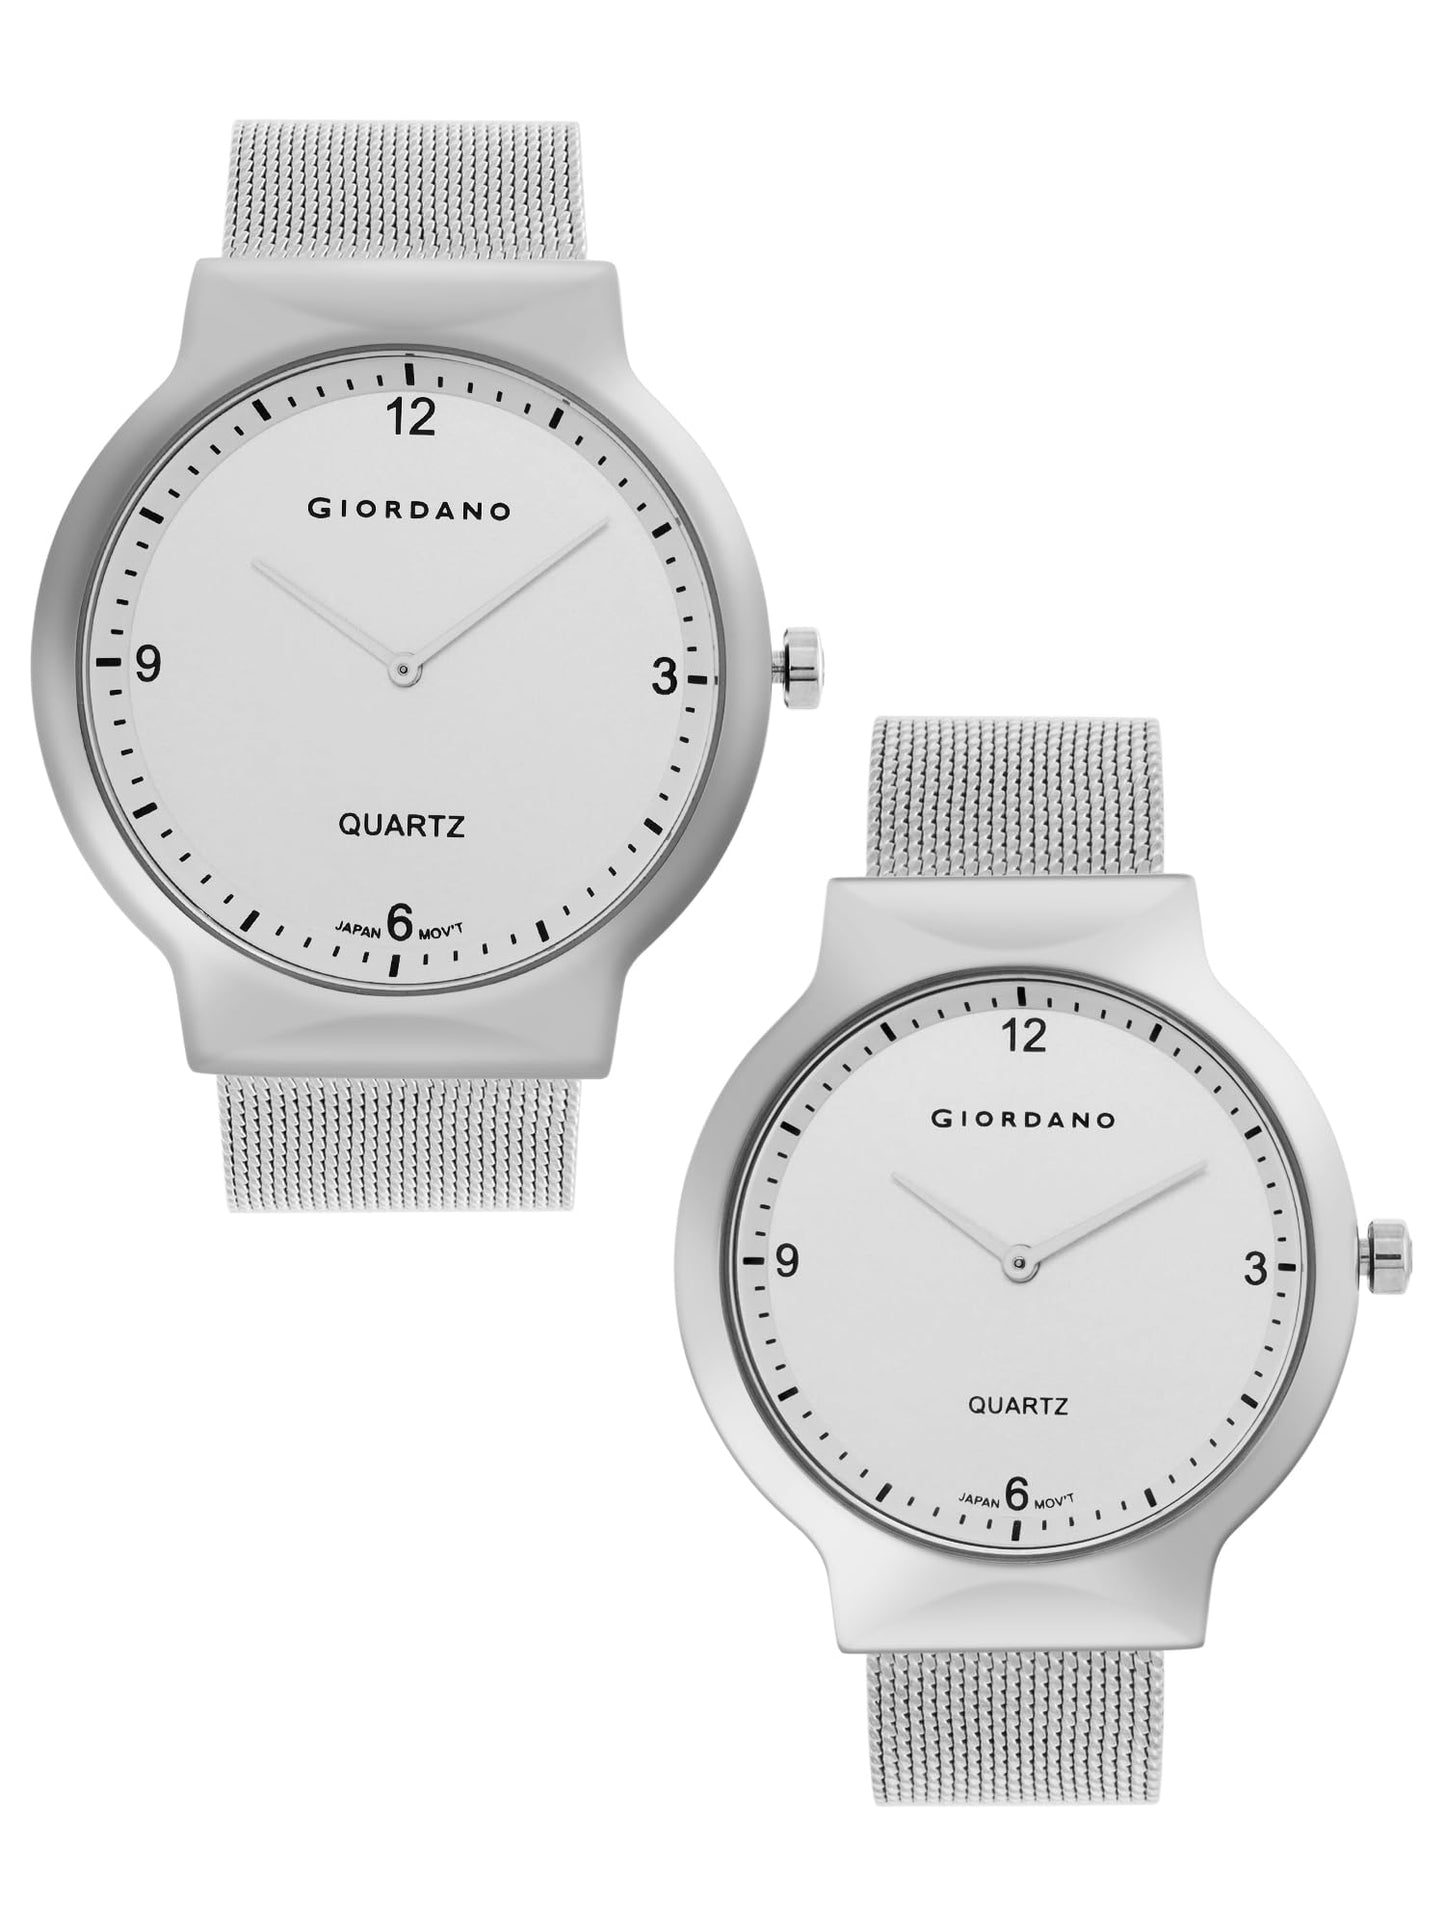 Giordano Analog Stylish Pair Wrist Watch for Couples Water Resistant Fashion Watch Round Shape with 2 Hand Mechanism to Compliment Your Look/Ideal Gift for Men & Women - GZ-987-SET